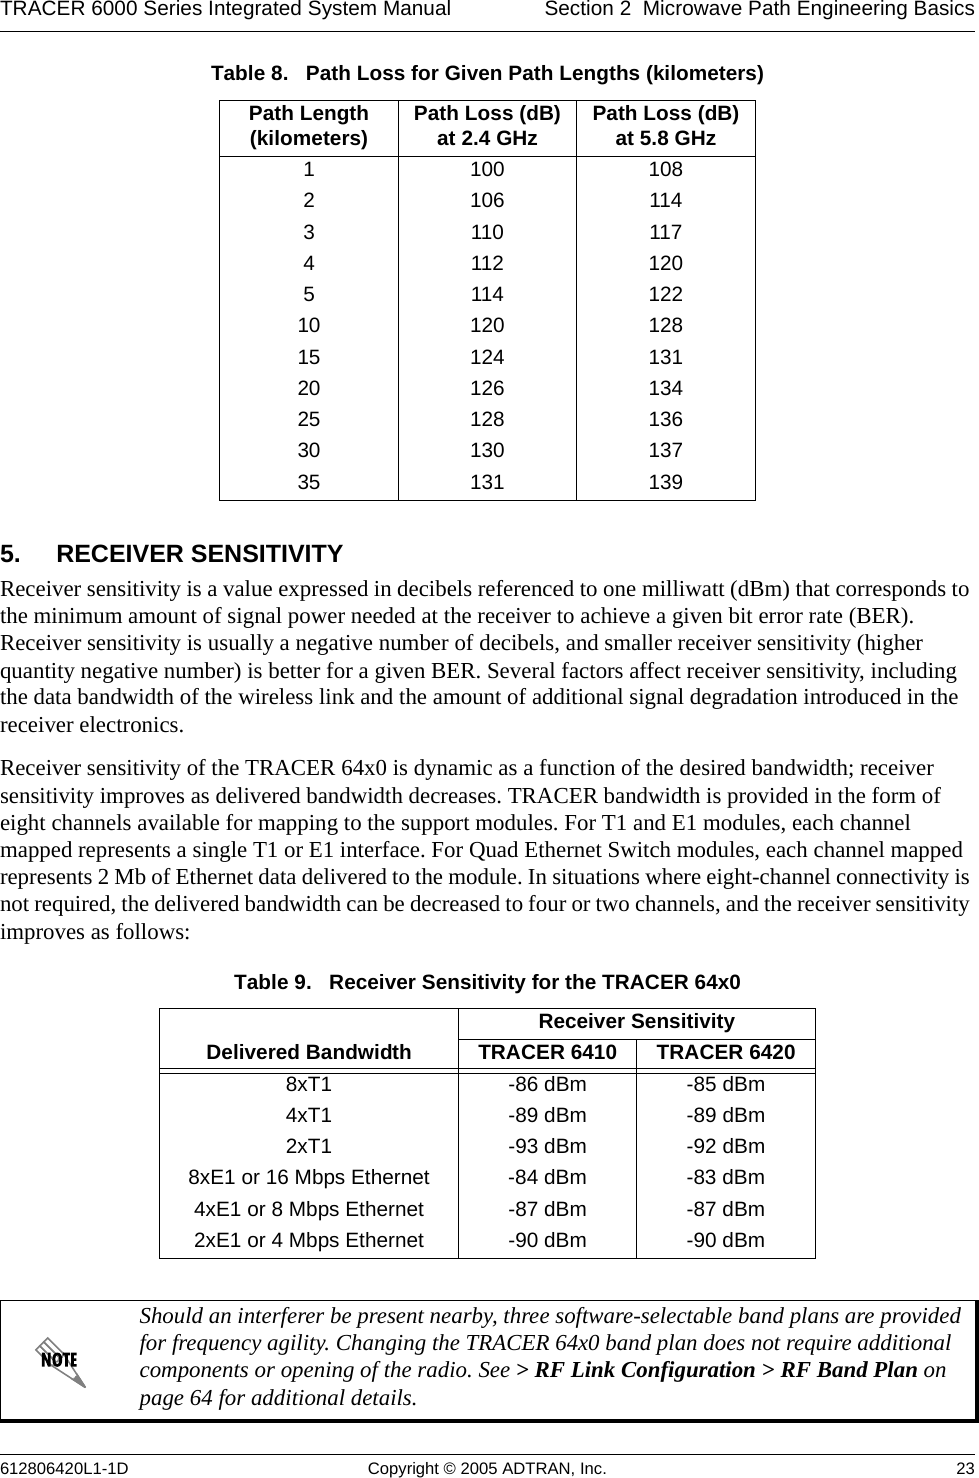 TRACER 6000 Series Integrated System Manual Section 2  Microwave Path Engineering Basics612806420L1-1D Copyright © 2005 ADTRAN, Inc. 235. RECEIVER SENSITIVITYReceiver sensitivity is a value expressed in decibels referenced to one milliwatt (dBm) that corresponds to the minimum amount of signal power needed at the receiver to achieve a given bit error rate (BER). Receiver sensitivity is usually a negative number of decibels, and smaller receiver sensitivity (higher quantity negative number) is better for a given BER. Several factors affect receiver sensitivity, including the data bandwidth of the wireless link and the amount of additional signal degradation introduced in the receiver electronics.Receiver sensitivity of the TRACER 64x0 is dynamic as a function of the desired bandwidth; receiver sensitivity improves as delivered bandwidth decreases. TRACER bandwidth is provided in the form of eight channels available for mapping to the support modules. For T1 and E1 modules, each channel mapped represents a single T1 or E1 interface. For Quad Ethernet Switch modules, each channel mapped represents 2 Mb of Ethernet data delivered to the module. In situations where eight-channel connectivity is not required, the delivered bandwidth can be decreased to four or two channels, and the receiver sensitivity improves as follows:Table 8.   Path Loss for Given Path Lengths (kilometers)Path Length(kilometers) Path Loss (dB) at 2.4 GHz Path Loss (dB) at 5.8 GHz1100 1082106 1143110 1174112 1205114 12210 120 12815 124 13120 126 13425 128 13630 130 13735 131 139Table 9.   Receiver Sensitivity for the TRACER 64x0Delivered BandwidthReceiver SensitivityTRACER 6410 TRACER 64208xT1 -86 dBm -85 dBm4xT1 -89 dBm -89 dBm2xT1 -93 dBm -92 dBm8xE1 or 16 Mbps Ethernet -84 dBm -83 dBm4xE1 or 8 Mbps Ethernet -87 dBm -87 dBm2xE1 or 4 Mbps Ethernet -90 dBm -90 dBmShould an interferer be present nearby, three software-selectable band plans are provided for frequency agility. Changing the TRACER 64x0 band plan does not require additional components or opening of the radio. See &gt; RF Link Configuration &gt; RF Band Plan on page 64 for additional details.